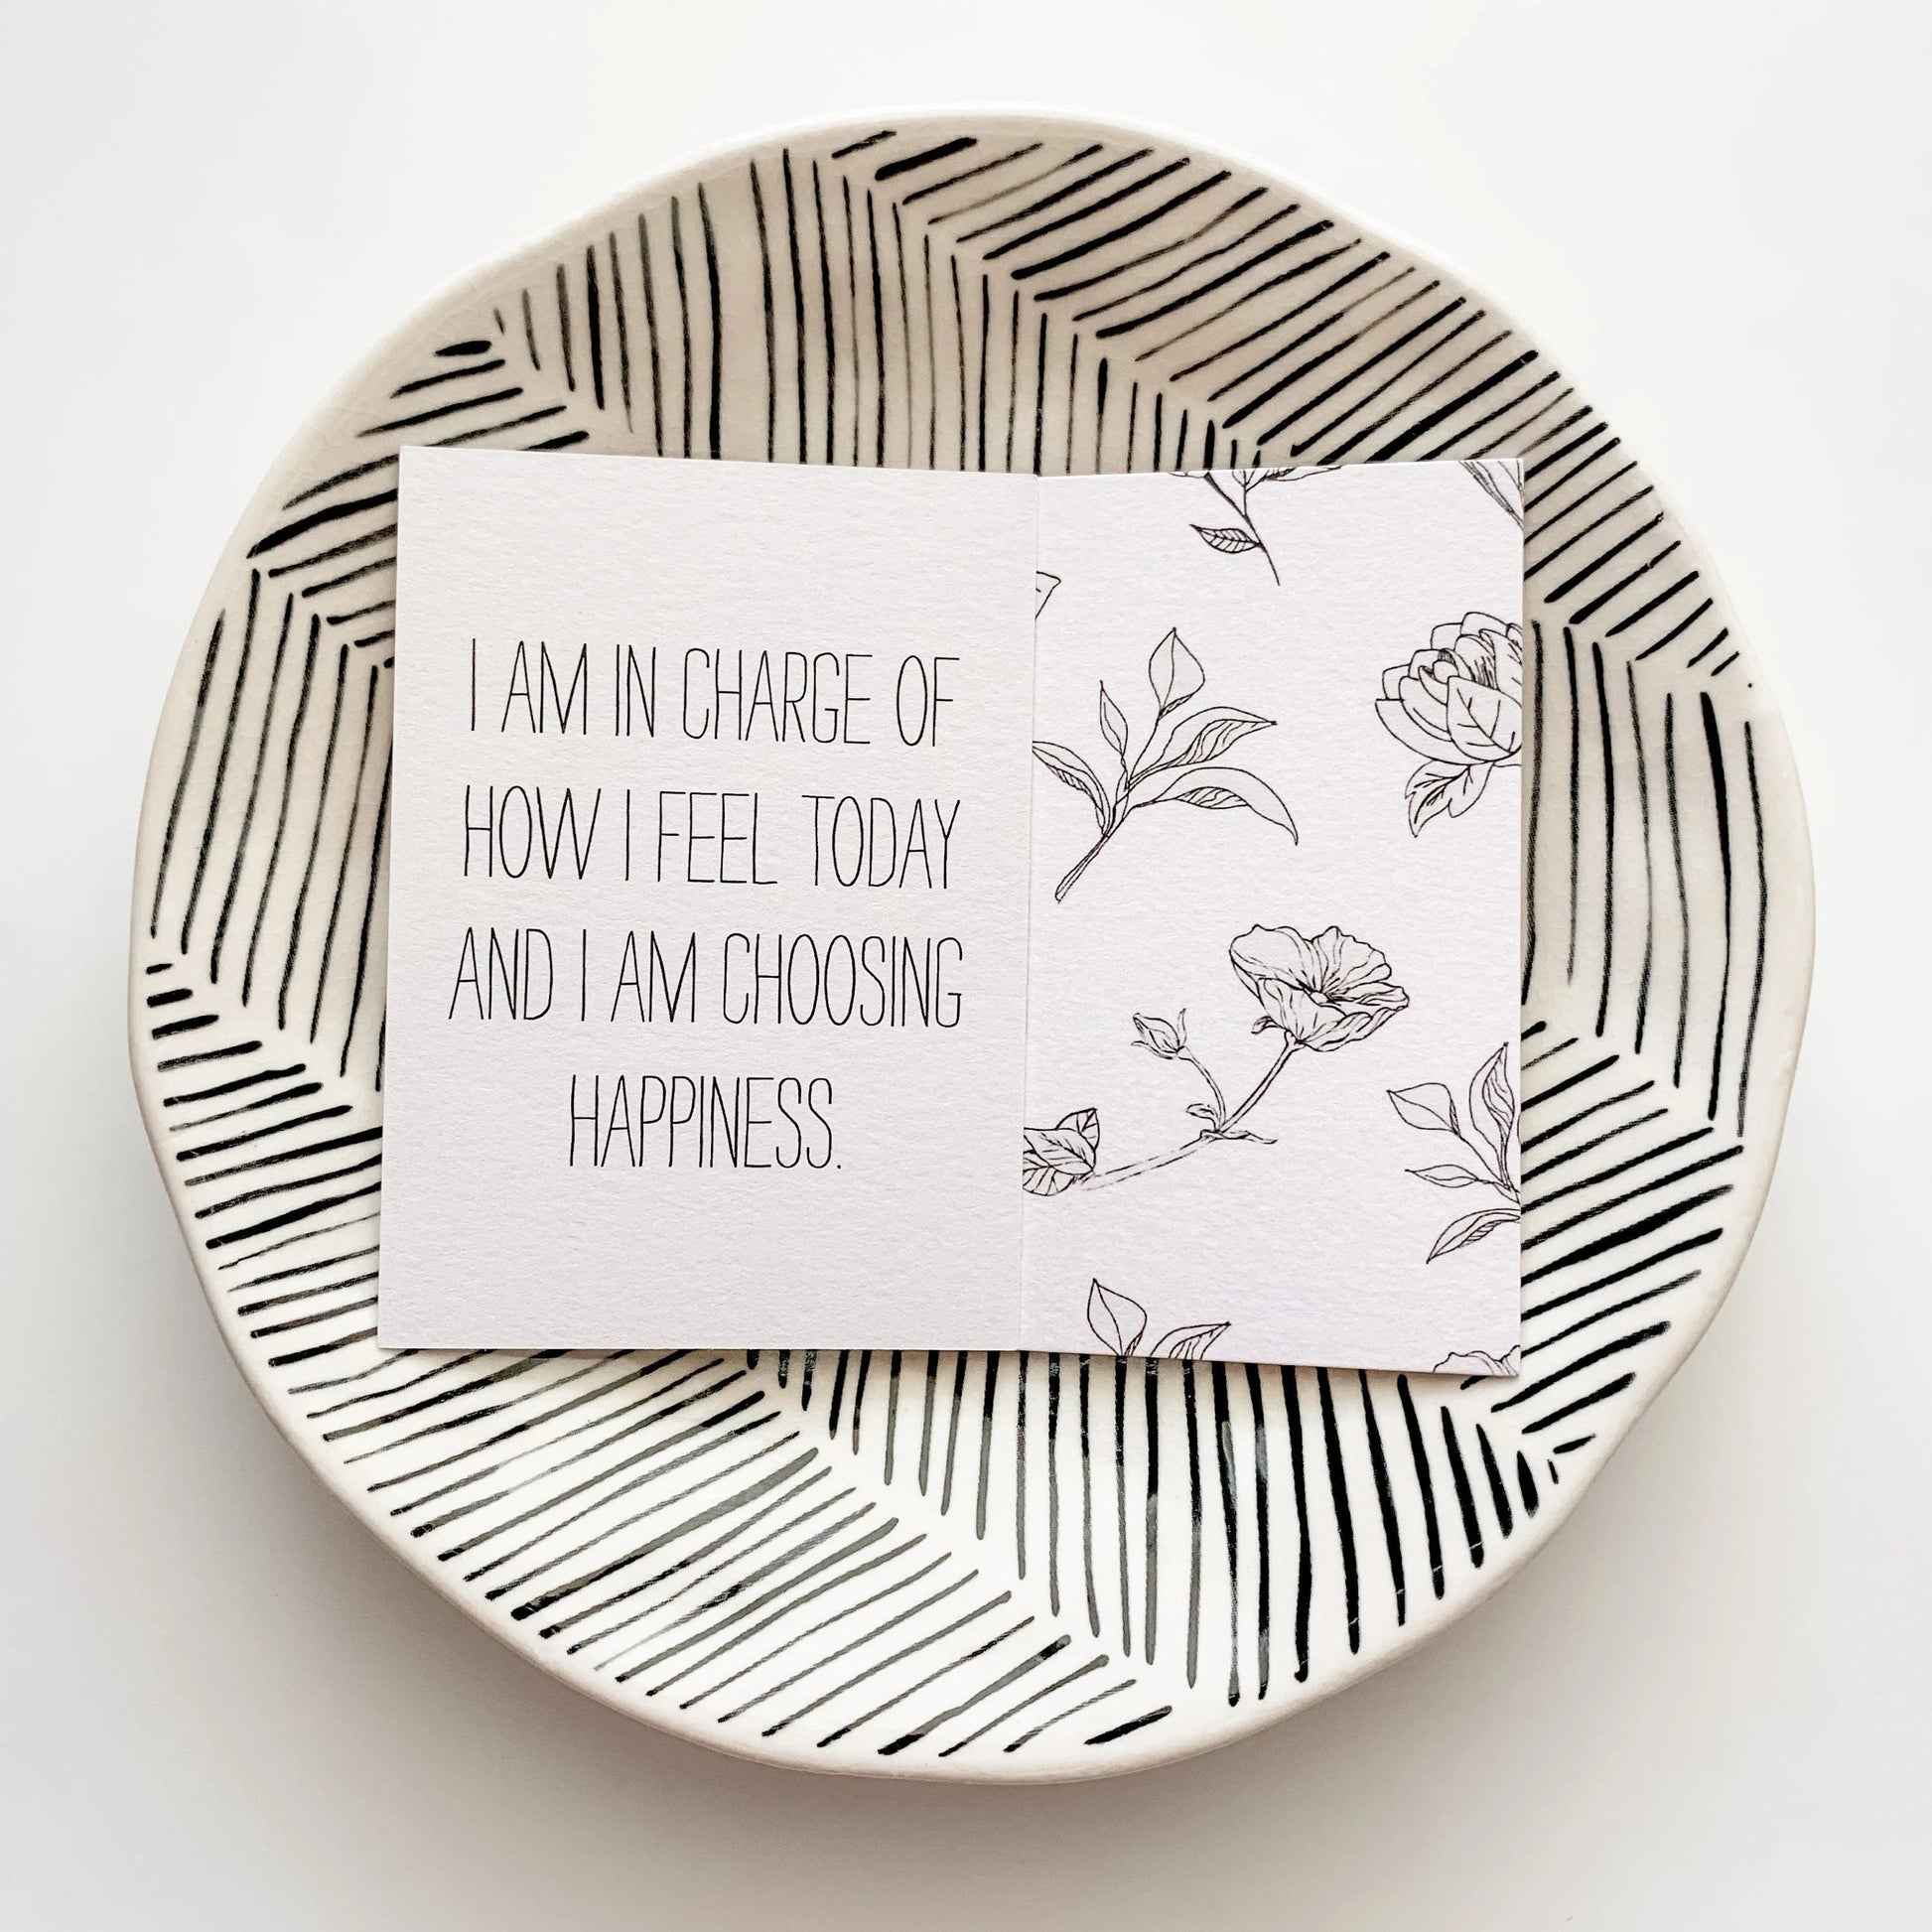 I am in charge of how I feel today, and I am choosing happiness Boho affirmation card.